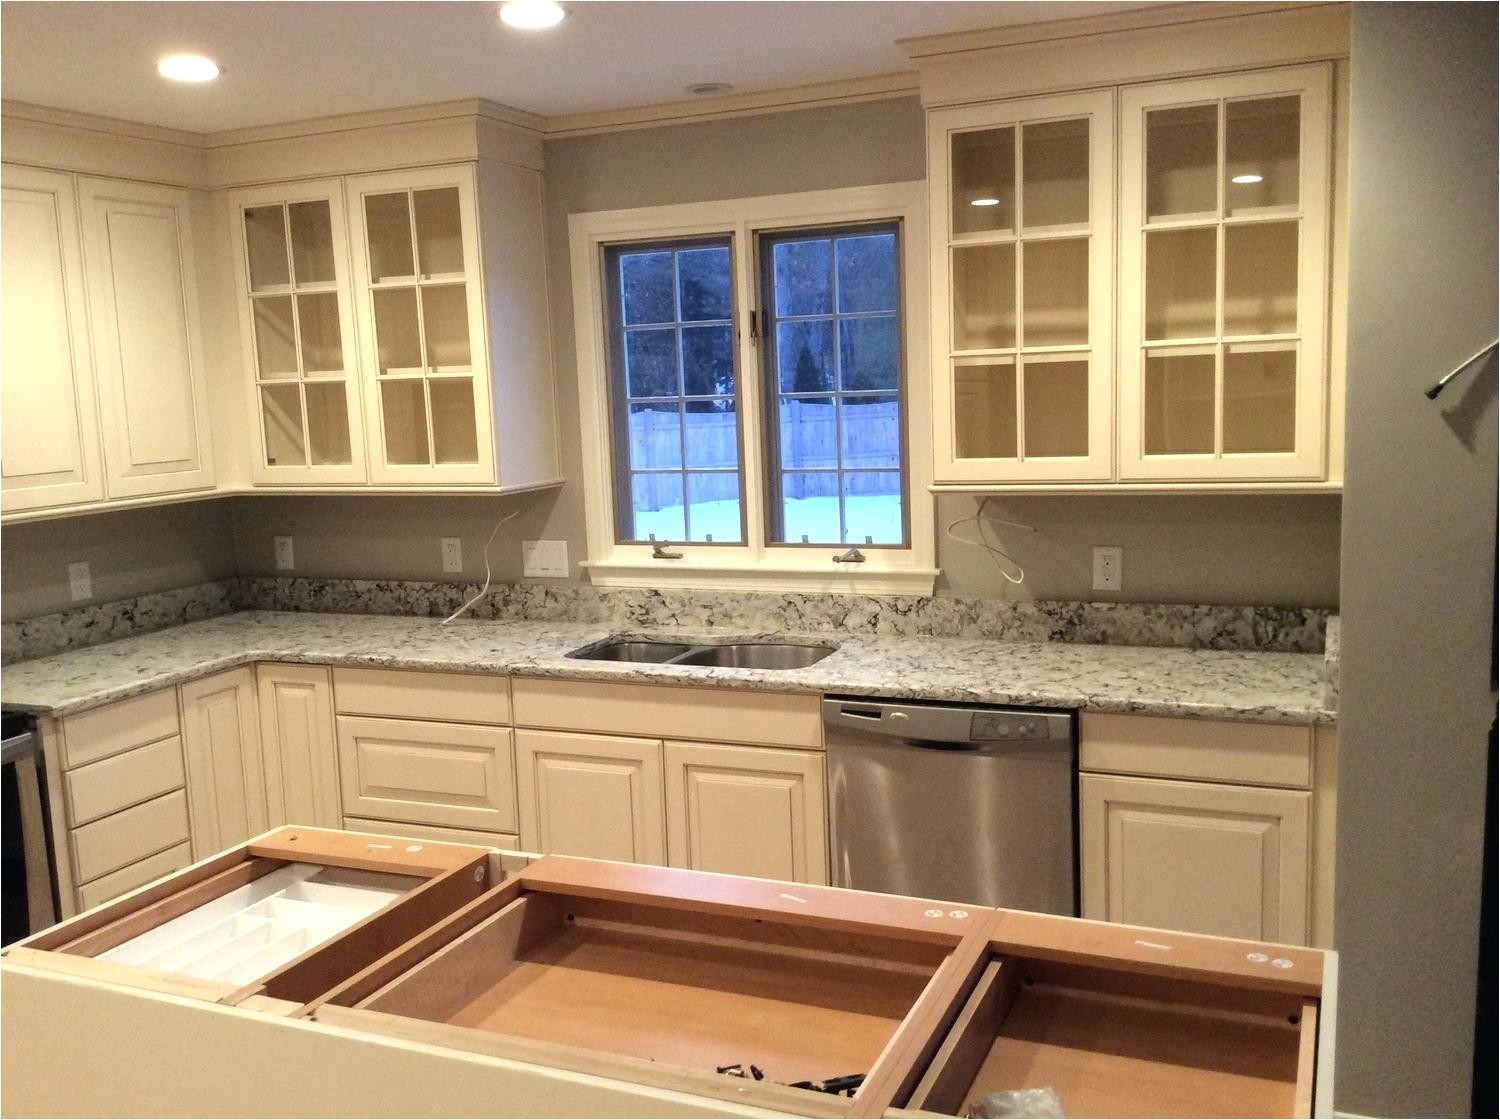 Brookhaven Cabinets Prices Brookhaven Cabinets Prices Brookhaven Cabinet Price List Brookhaven